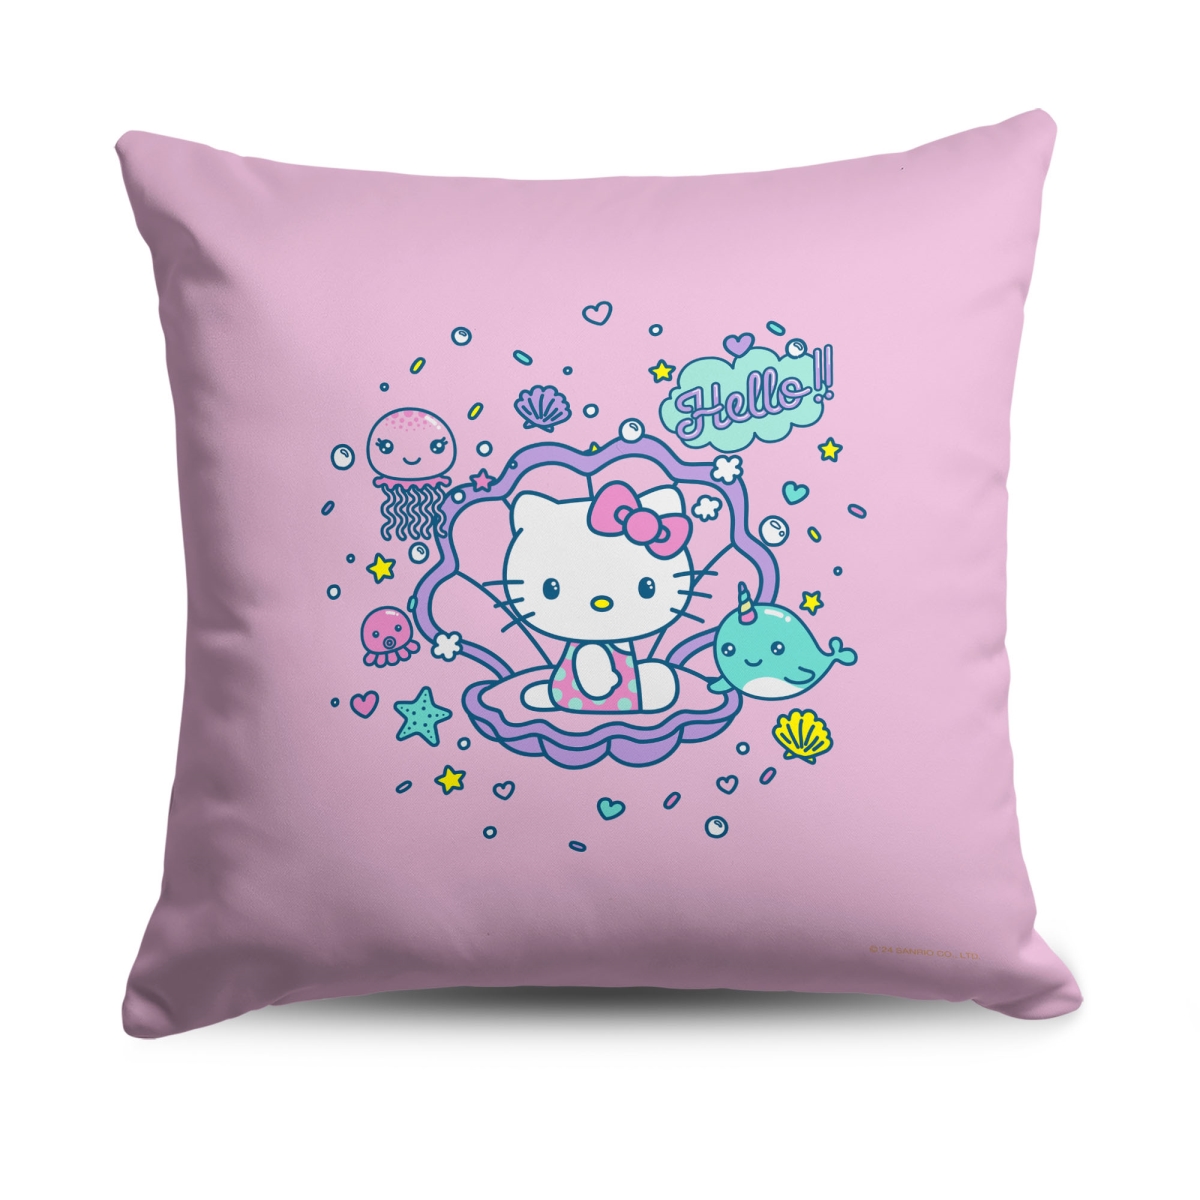 Picture of The Northwest Group 1SAN-69500-0037-RET 18 x 18 in. Hello Kitty Seashell Kitty Printed Throw Pillow